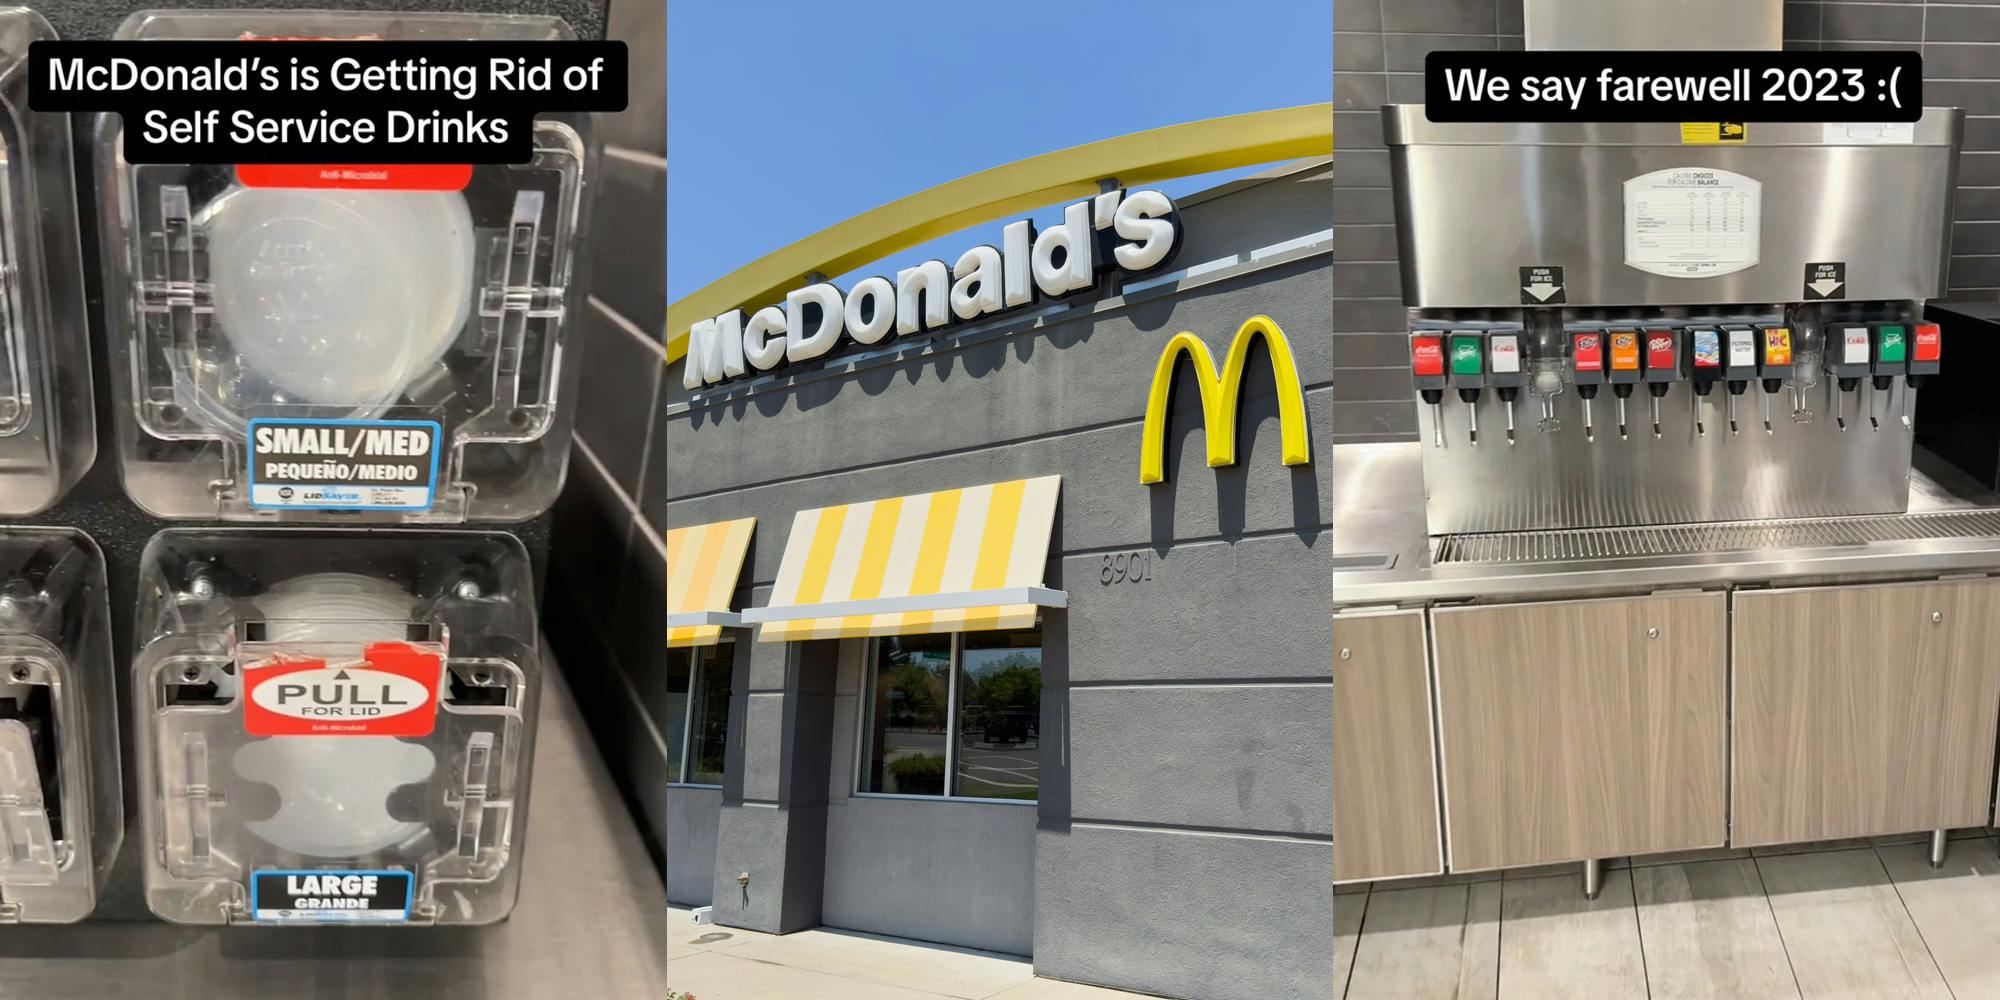 McDonald's self service drink station lids with caption "McDonald's is Getting Rid of Self Serve Drinks" (l) McDonald's building with signs (c) McDonald's self serve drink station with caption "We say farewell 2023:(" (r)